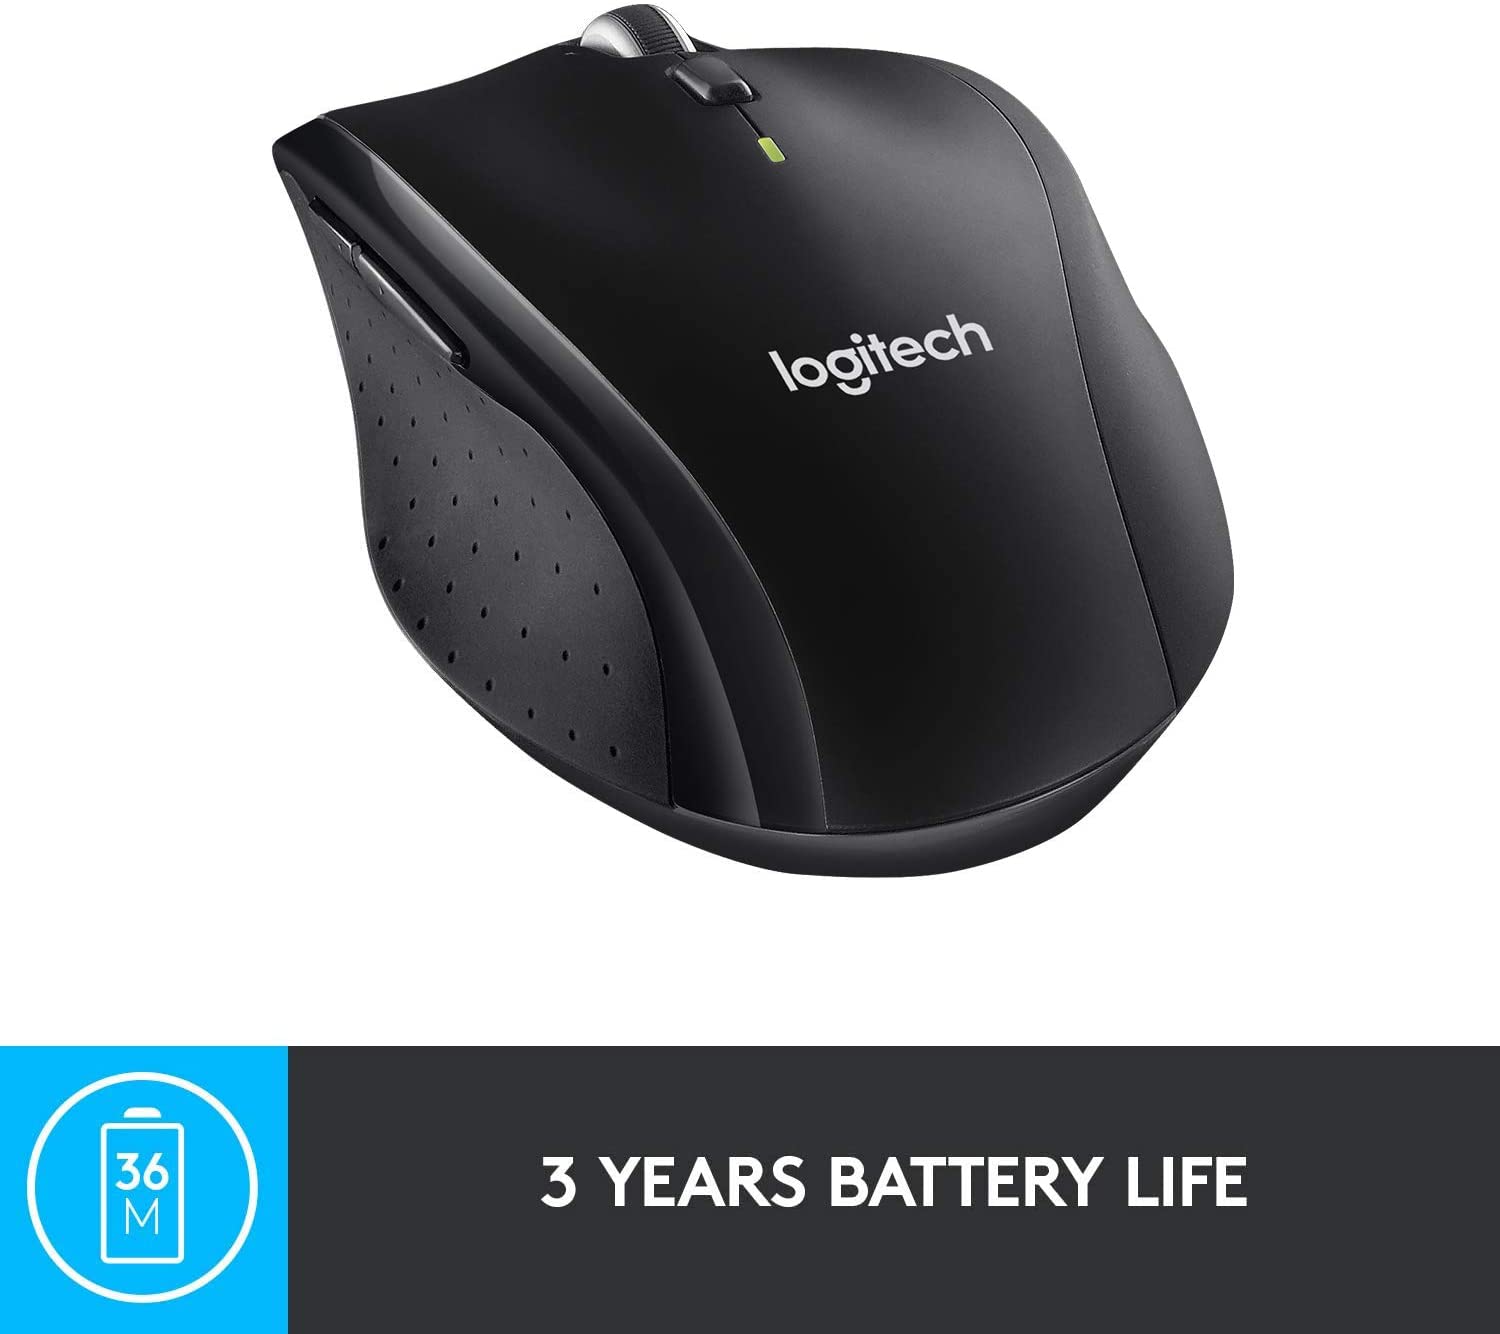 Logitech M705 Wireless Marathon Mouse for PC - Long 3 Year Battery Life, Ergonomic Shape with Hyper-Fast Scrolling and USB Unifying Receiver for Computer and Laptop - Black